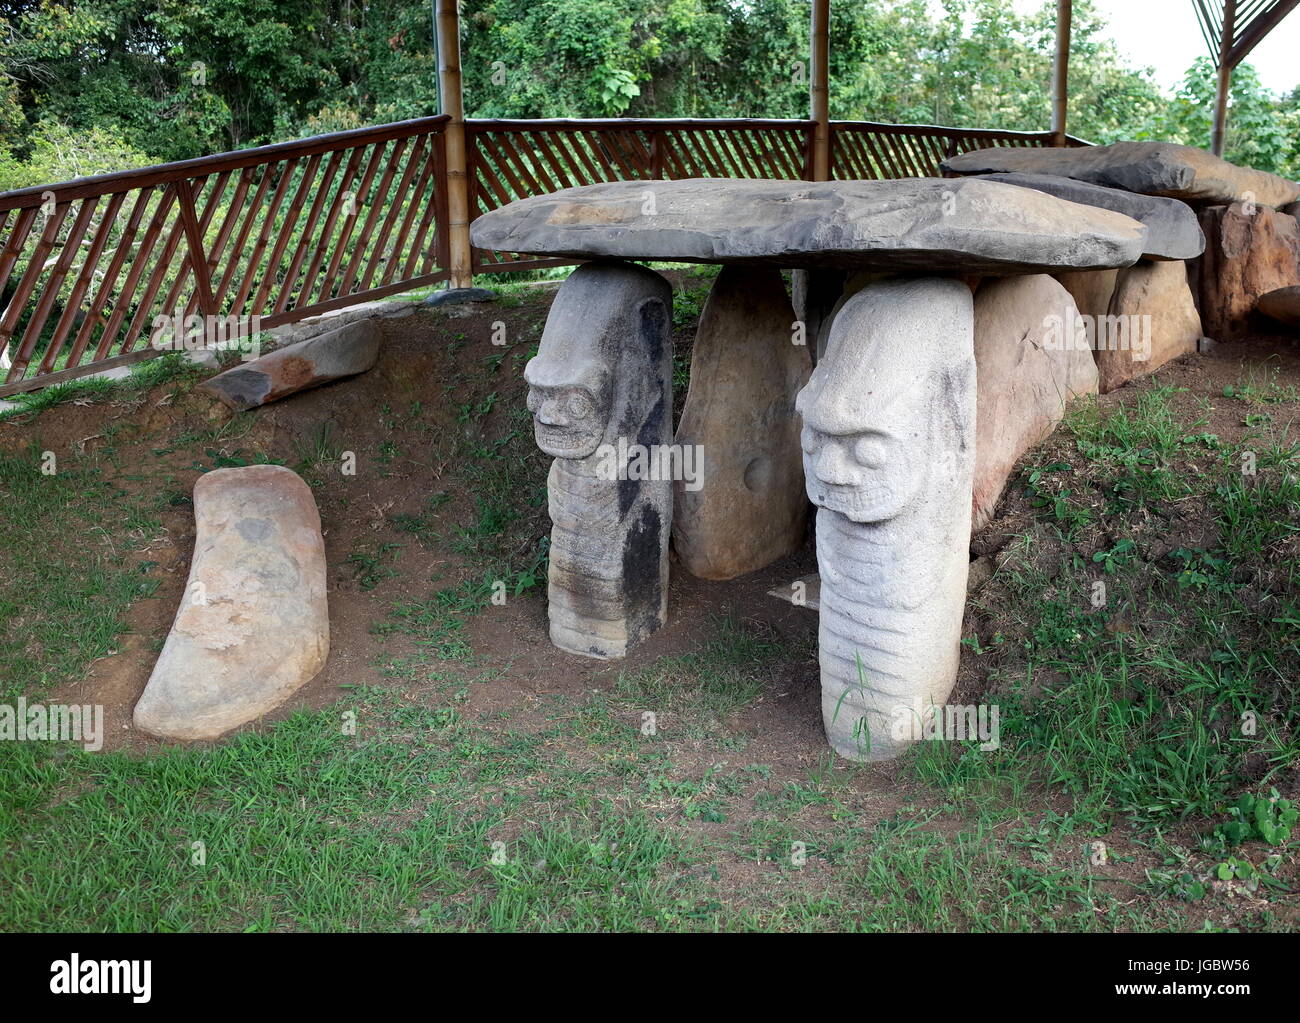 San Agustin parco archeologico, Colombia Foto Stock